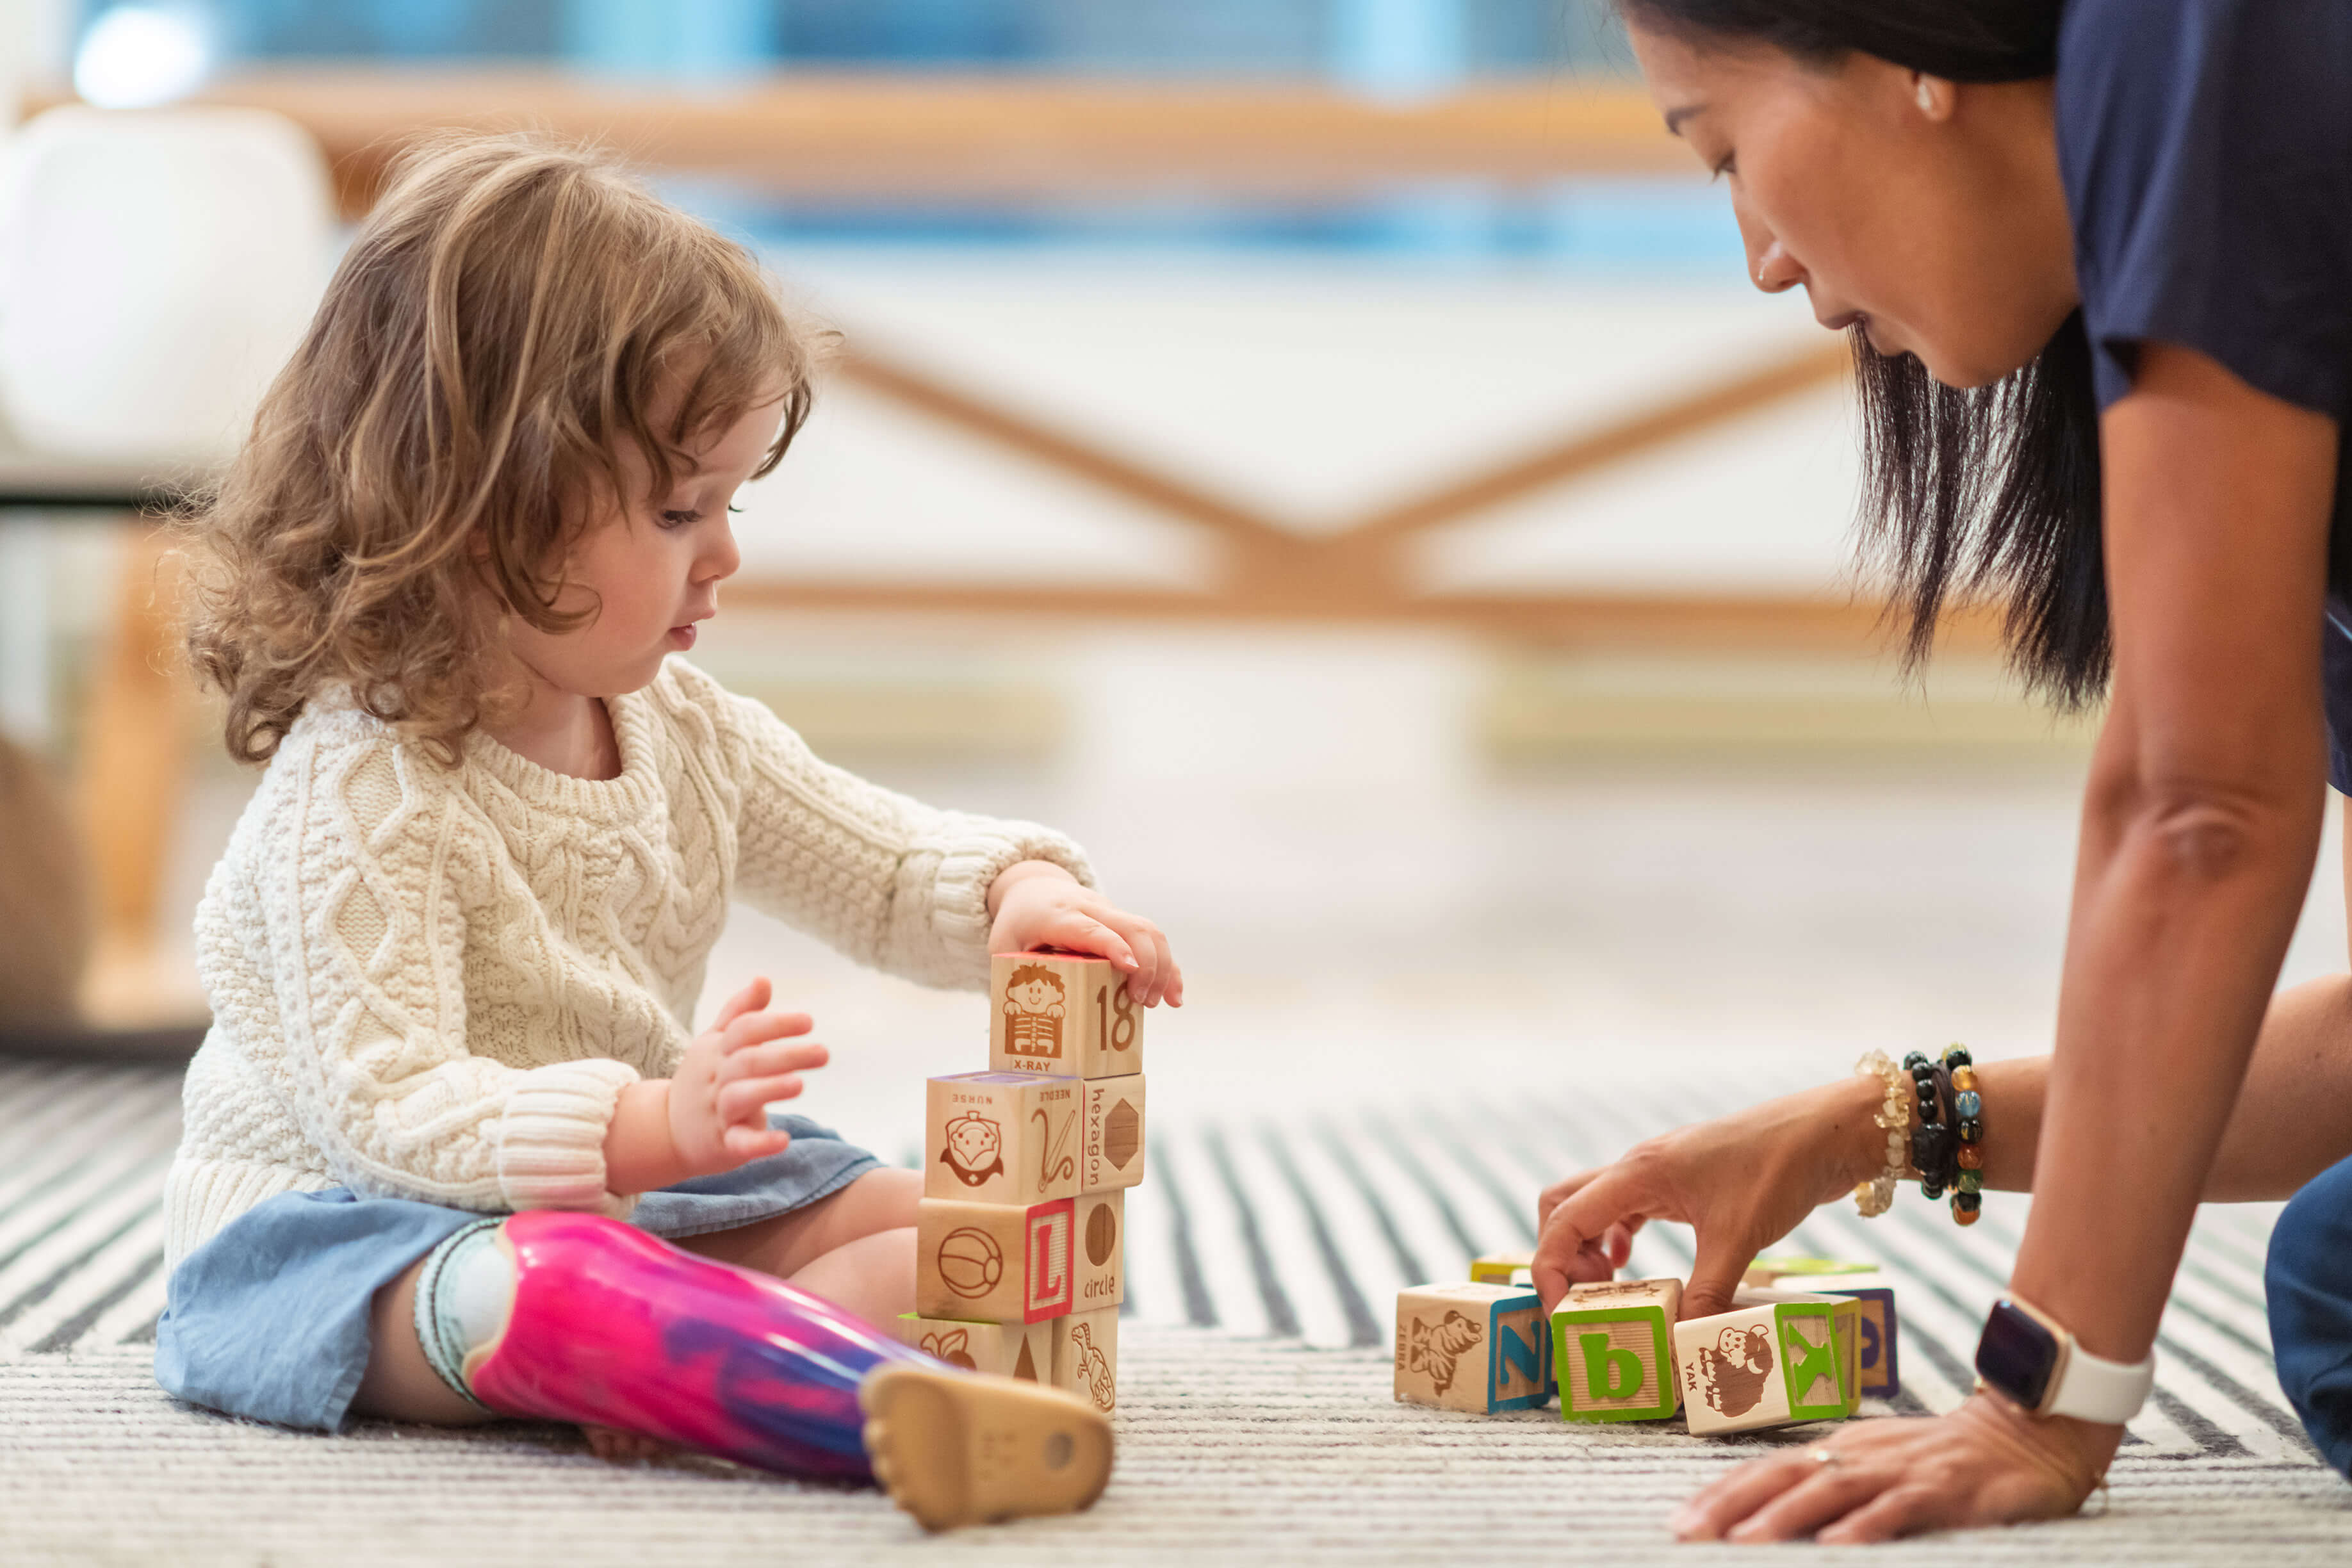 Toddler sitting on the floor playing blocks with child care provider